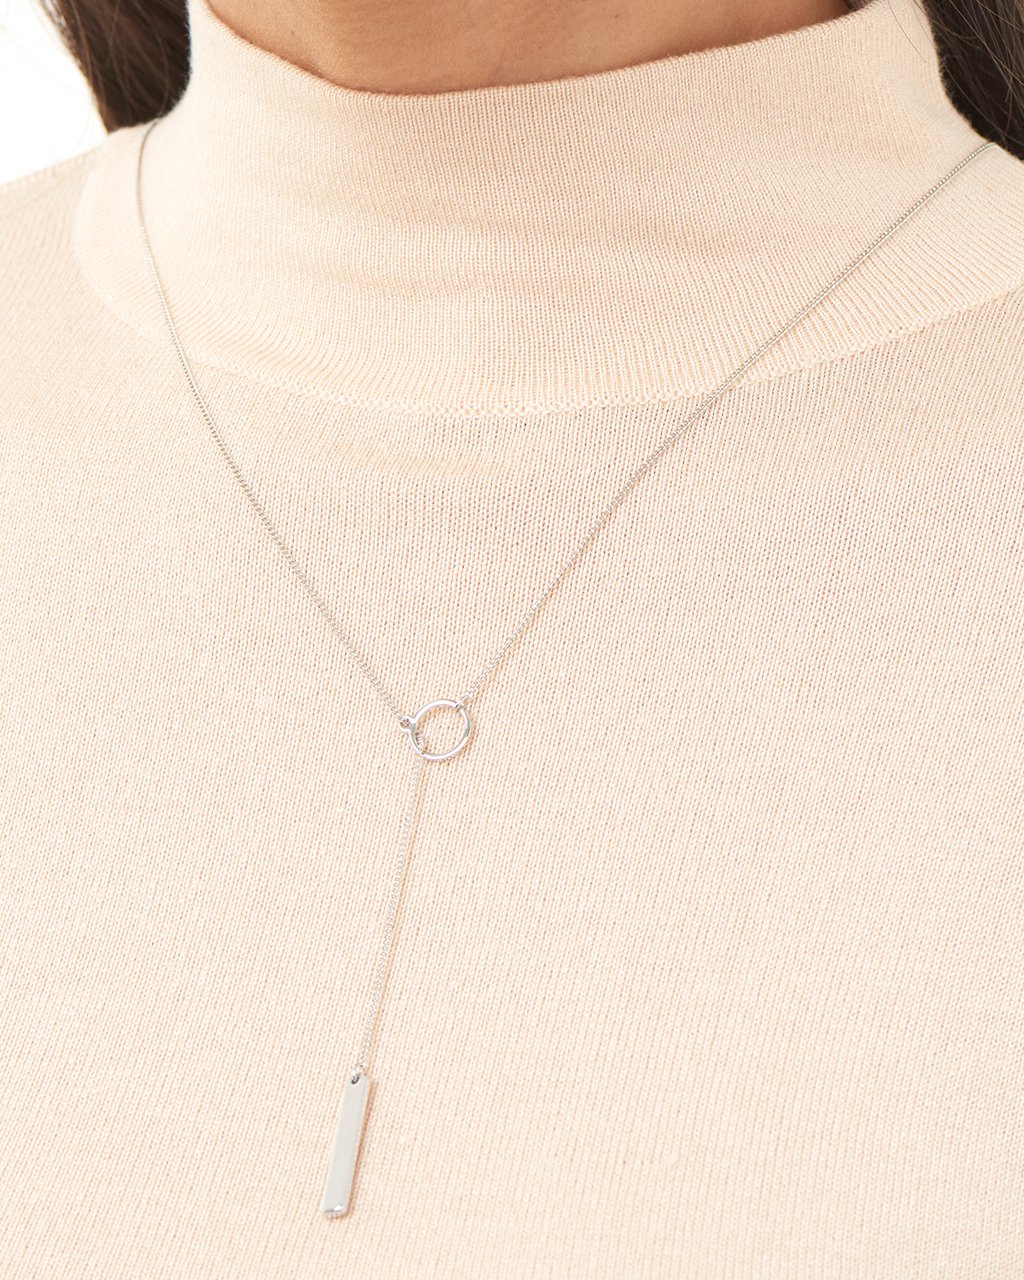 Lariat Bar Drop Necklace with CZ Stud Necklace Sterling Forever 